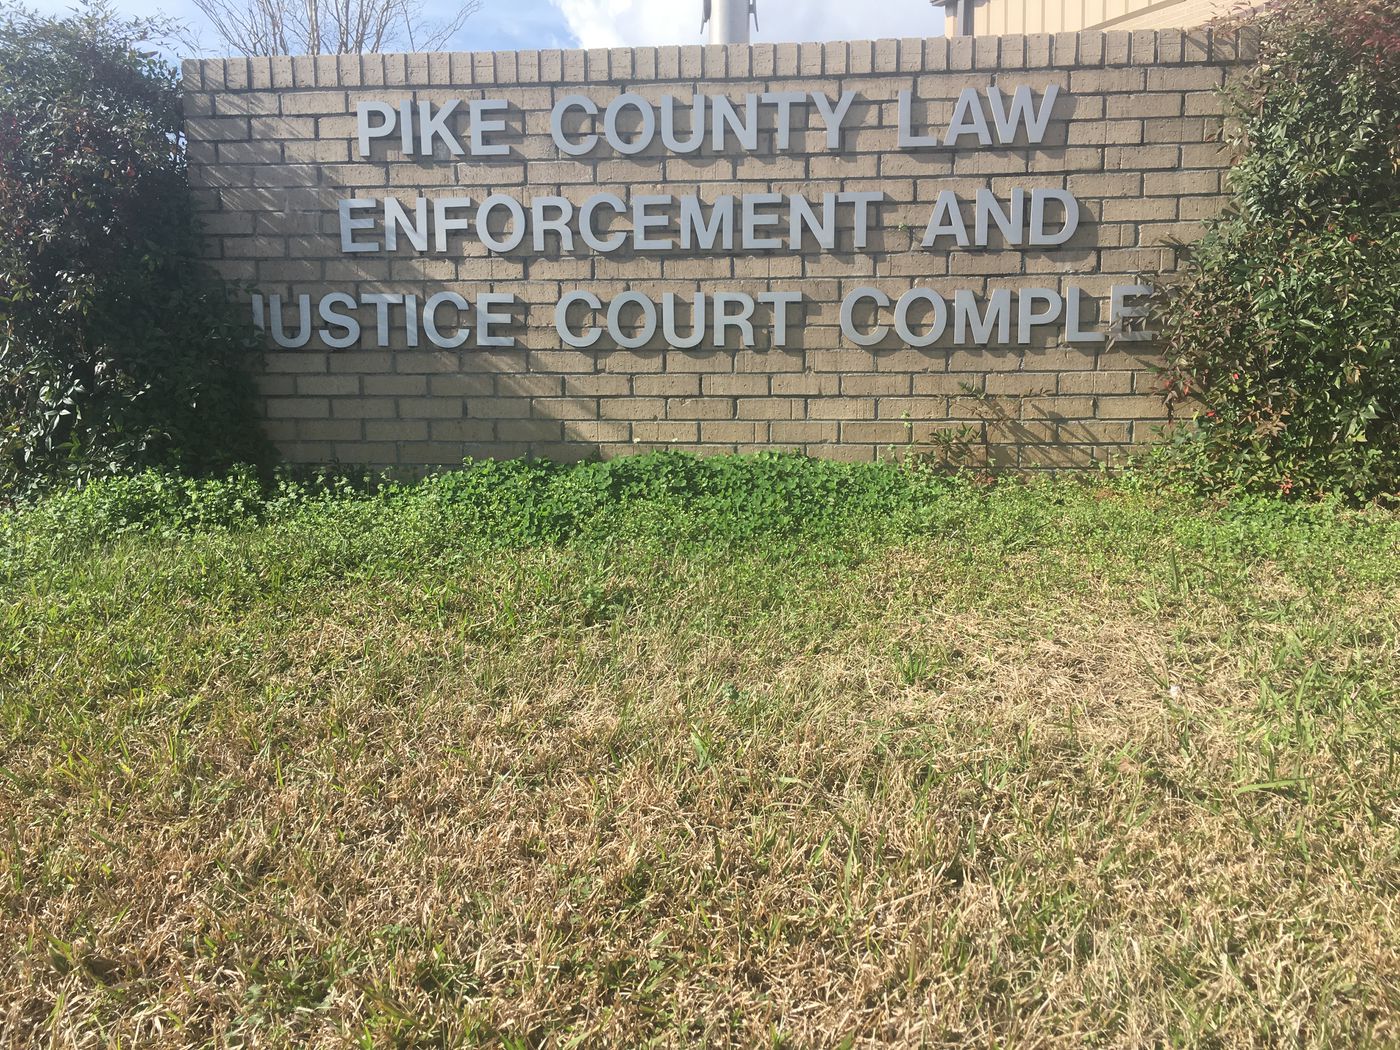 Pike County Sheriff's Department in Magnolia, MS. Source: WLBT